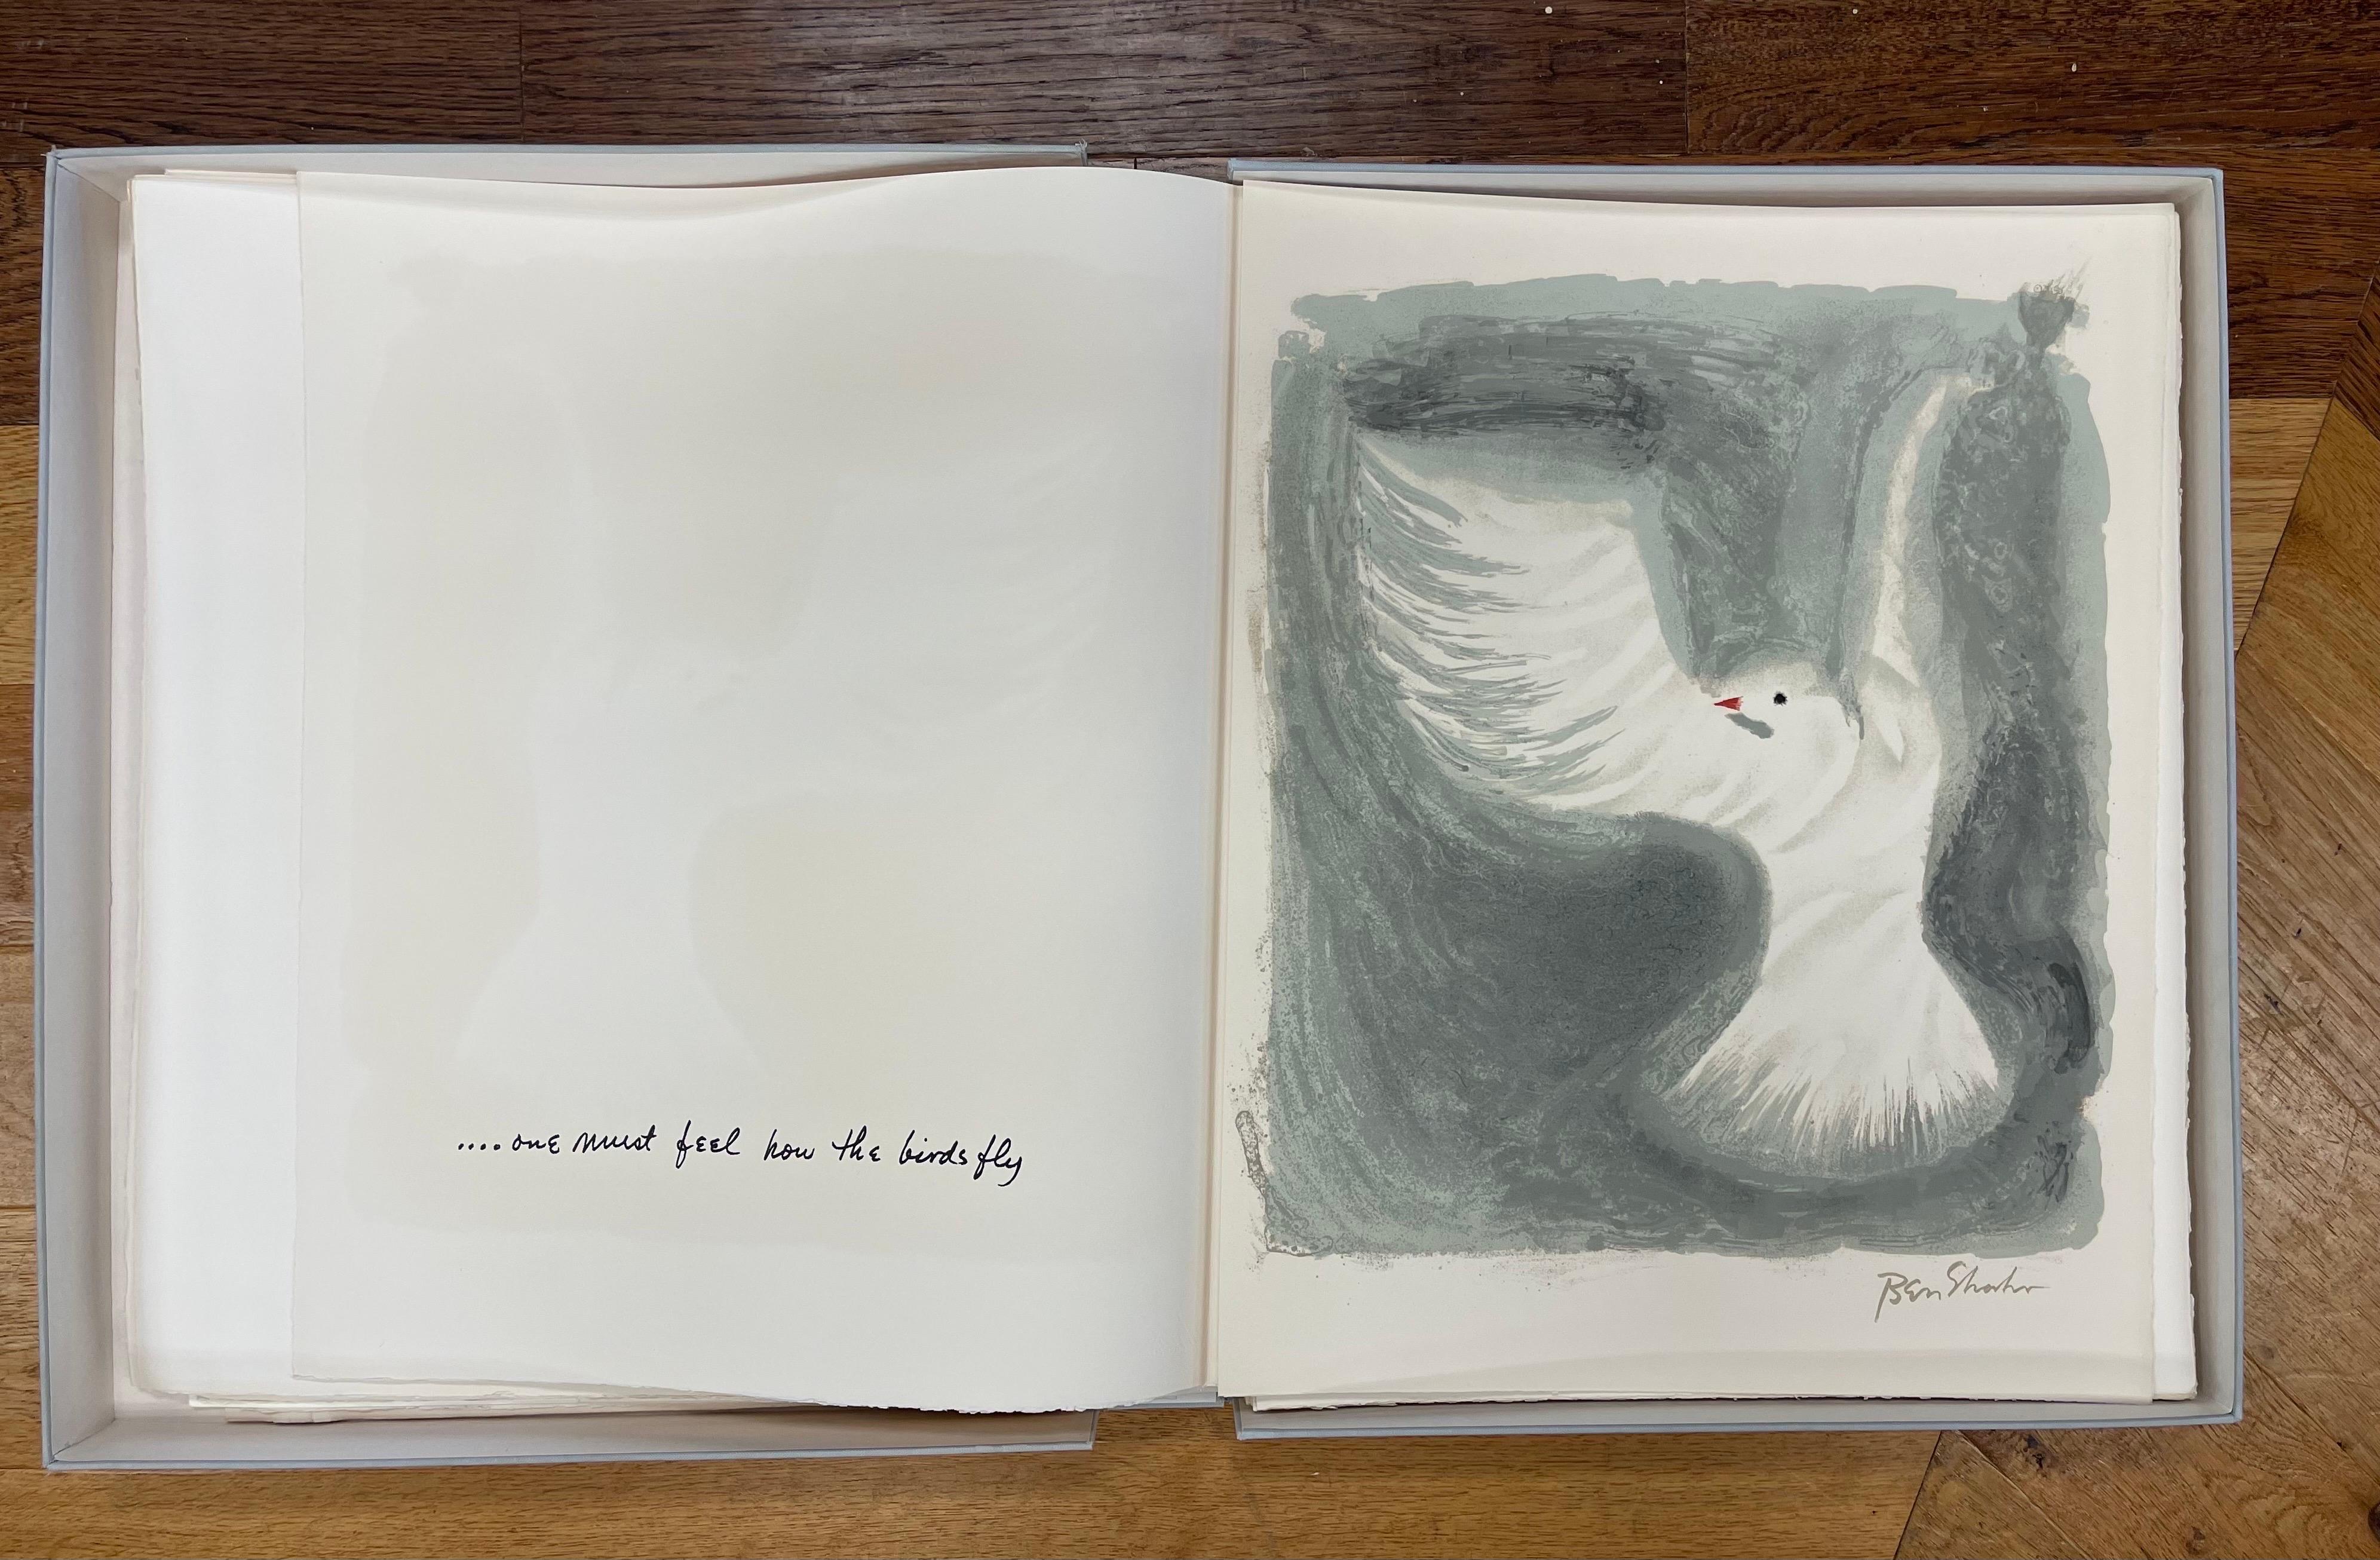 Coveted Ben Shahn Limited Edition Portfolio #234 with 24 Lithographs R. M. Rilke For Sale 9